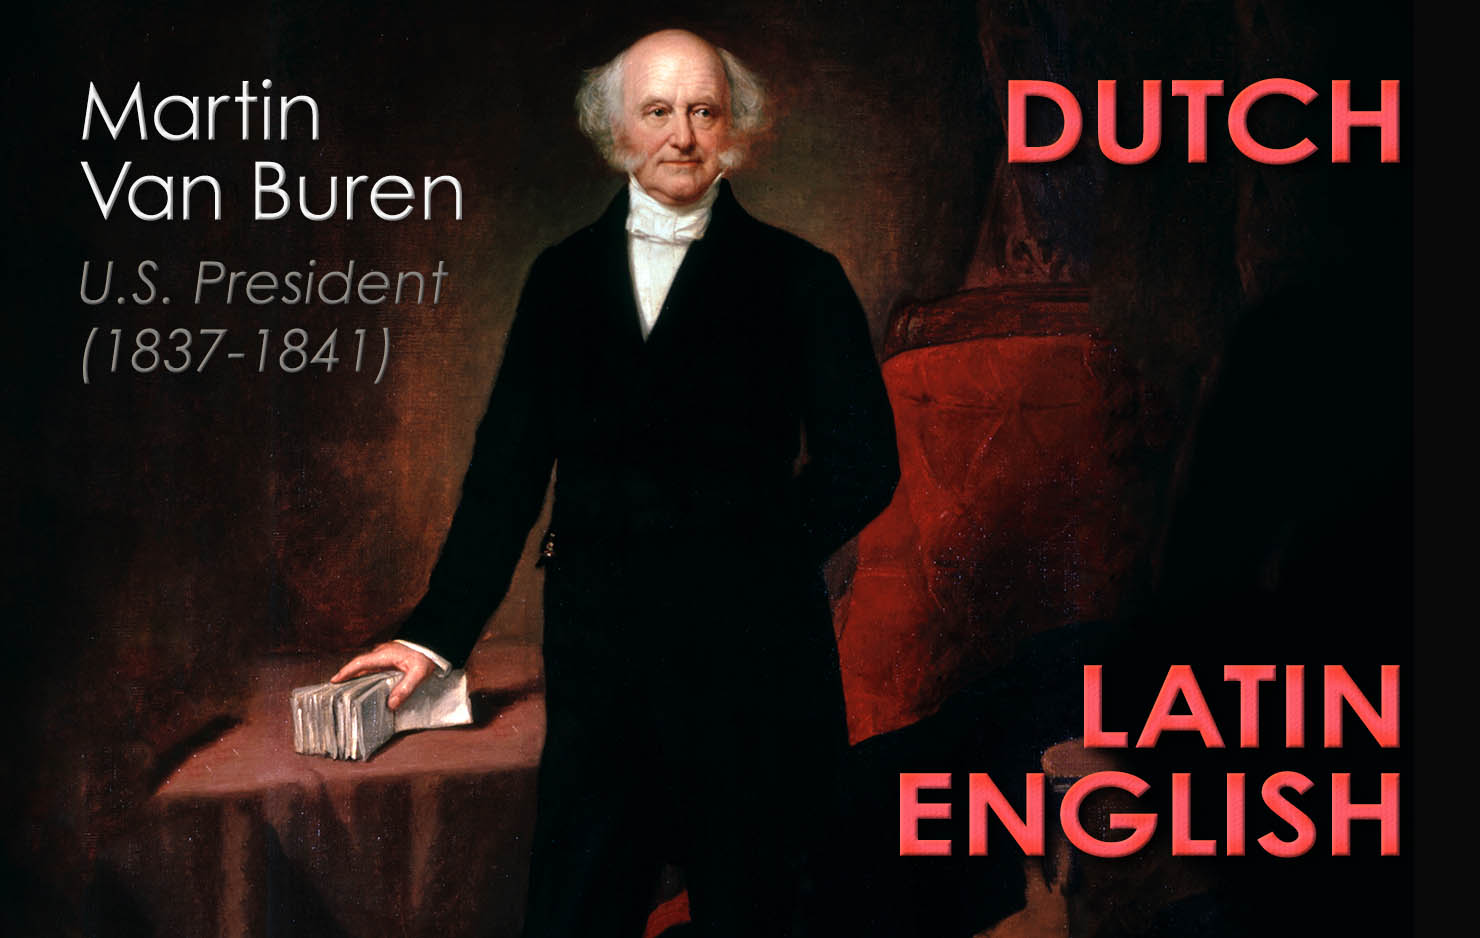 Martin Van Buren is the only U.S. president who did not speak English as his first language. His native language is Dutch. Besides learning English, he also studied Latin.